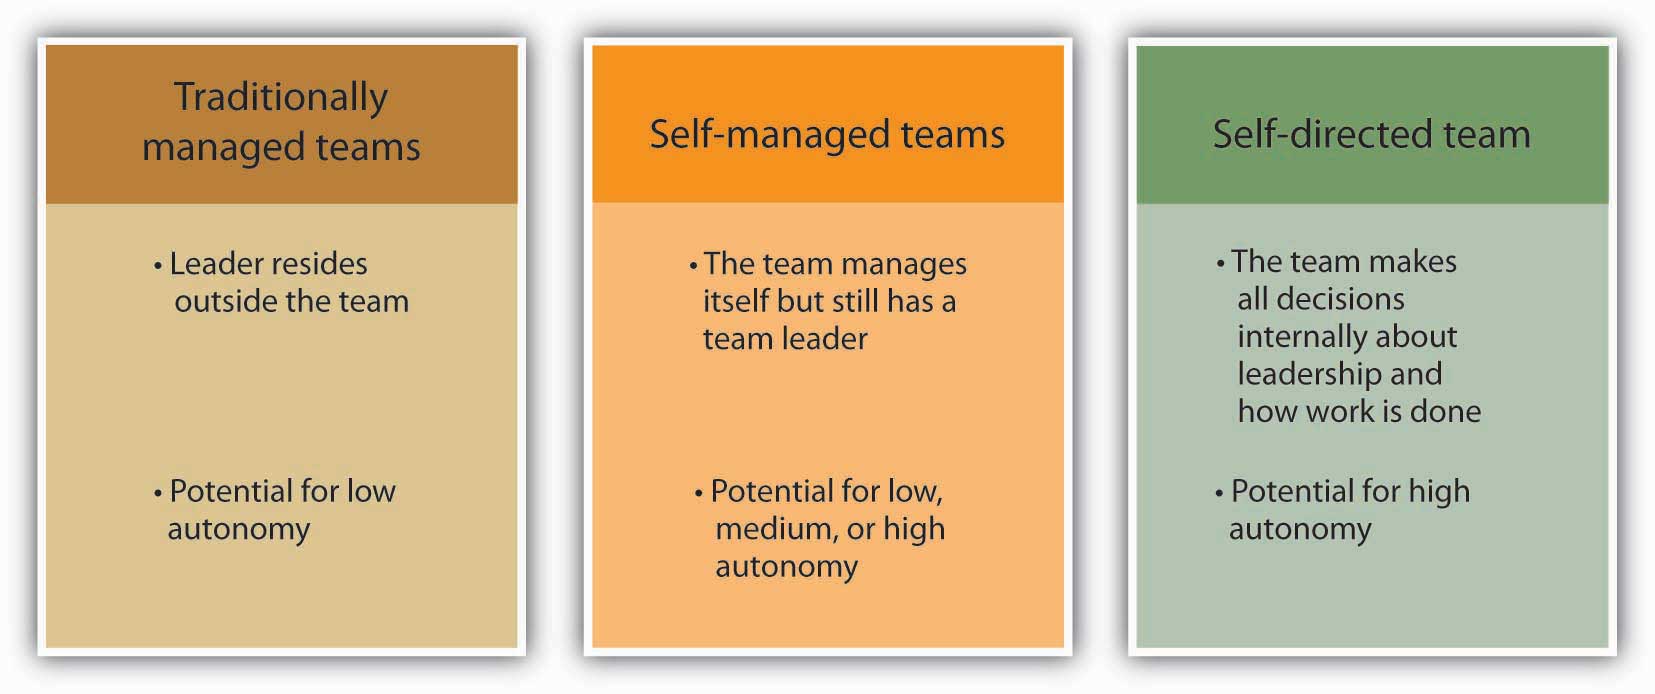 Team management and autonomy as described above